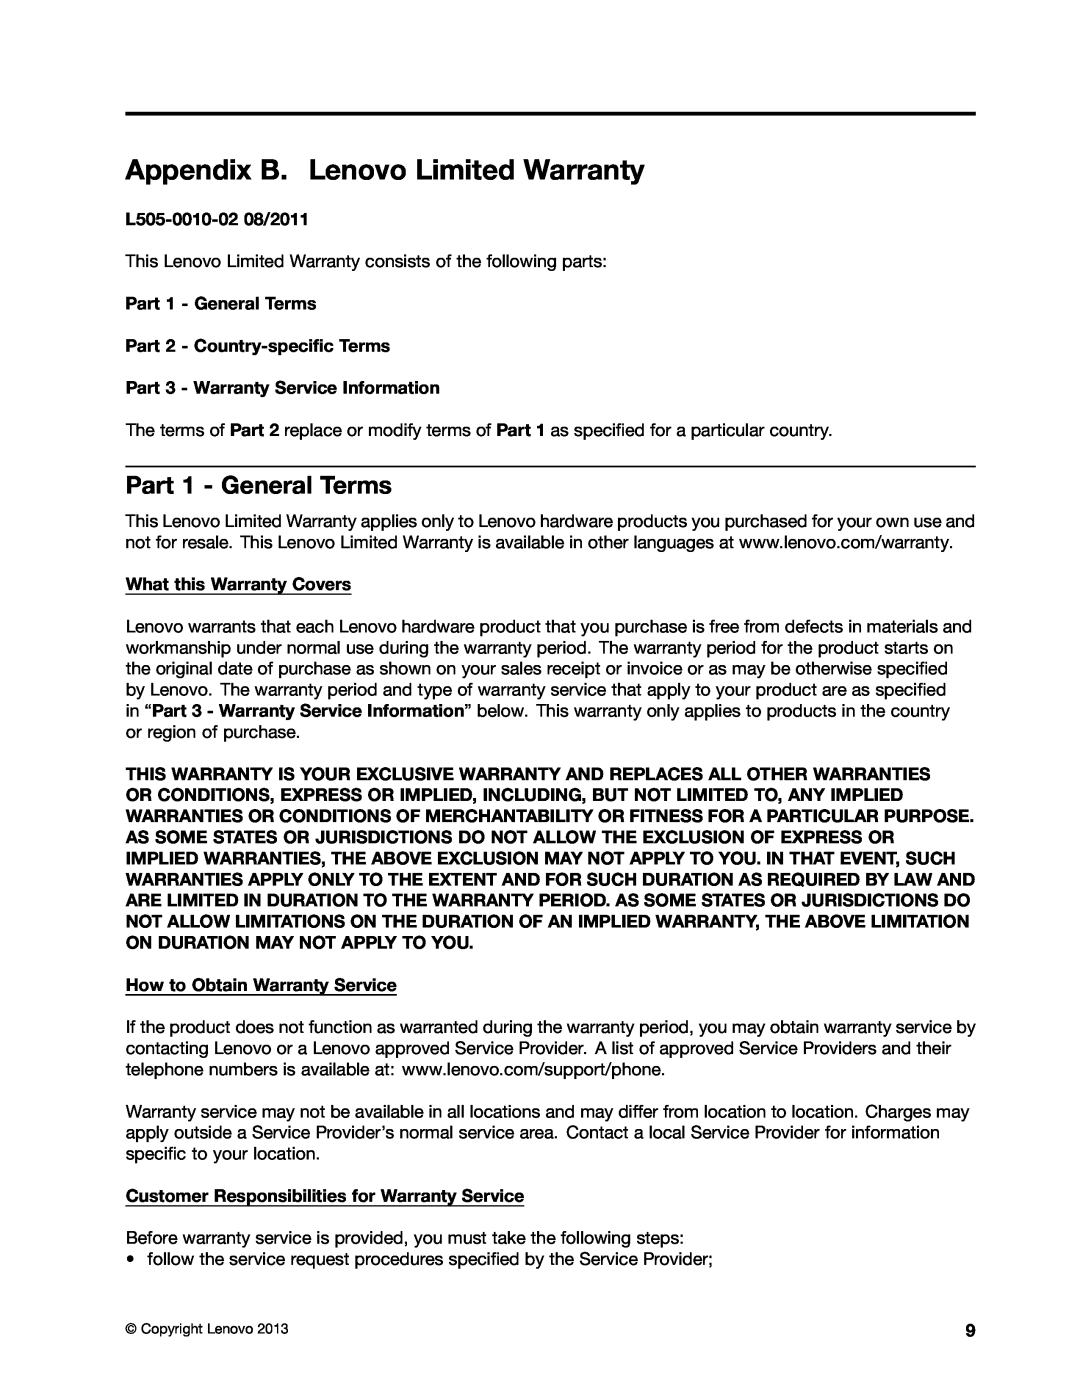 Lenovo NVS 315 Appendix B. Lenovo Limited Warranty, L505-0010-0208/2011, Part 1 - General Terms, What this Warranty Covers 